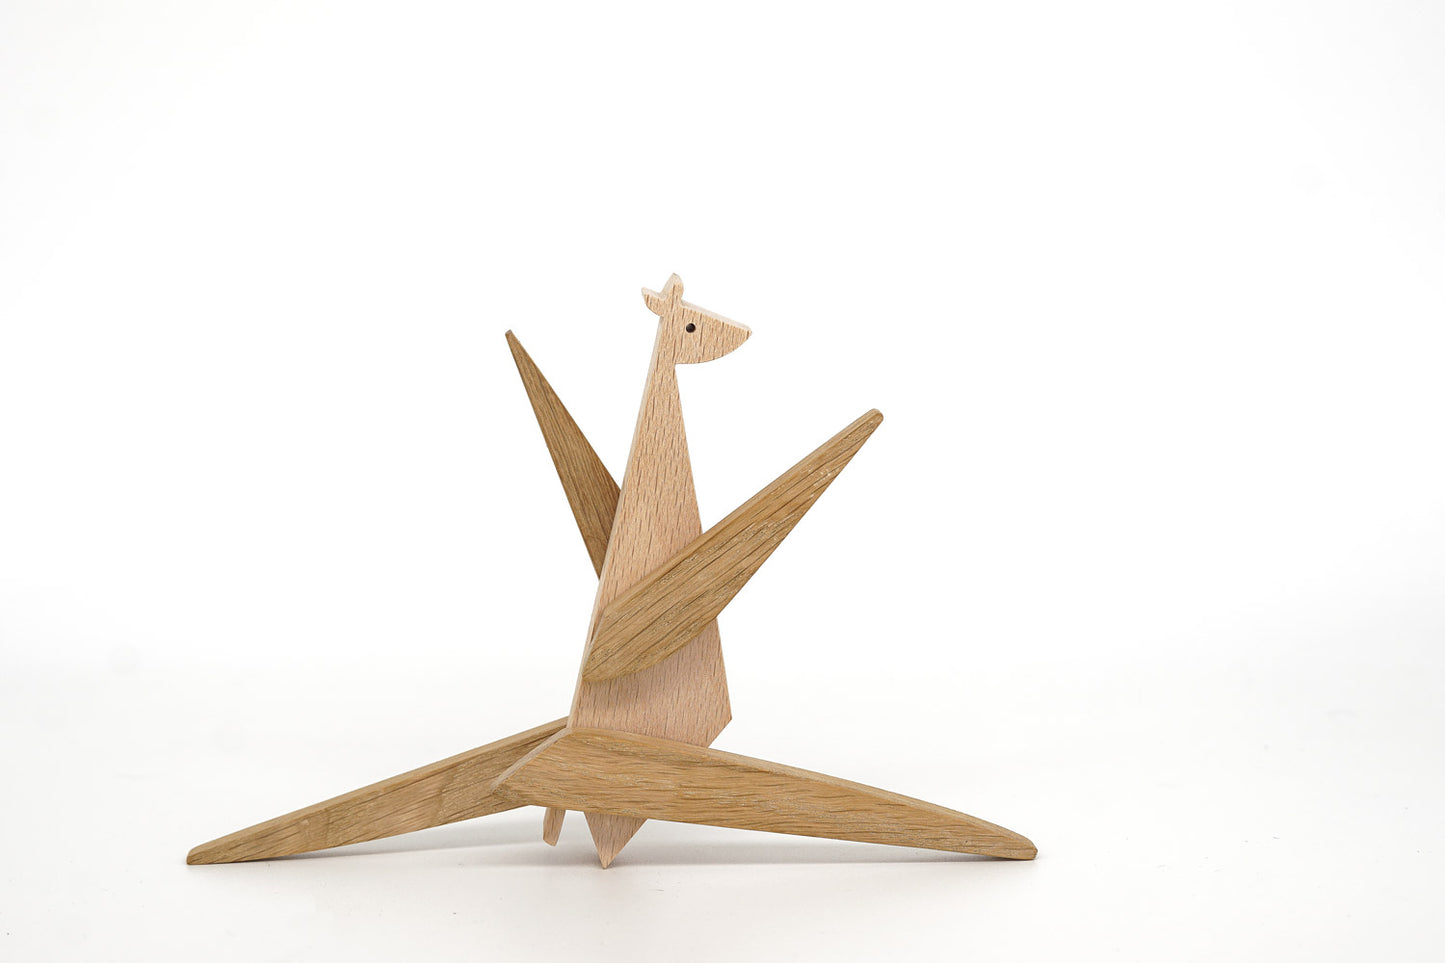 Who says Giraffes can't dance? Here's a magnetic wooden toy giraffe doing a split!